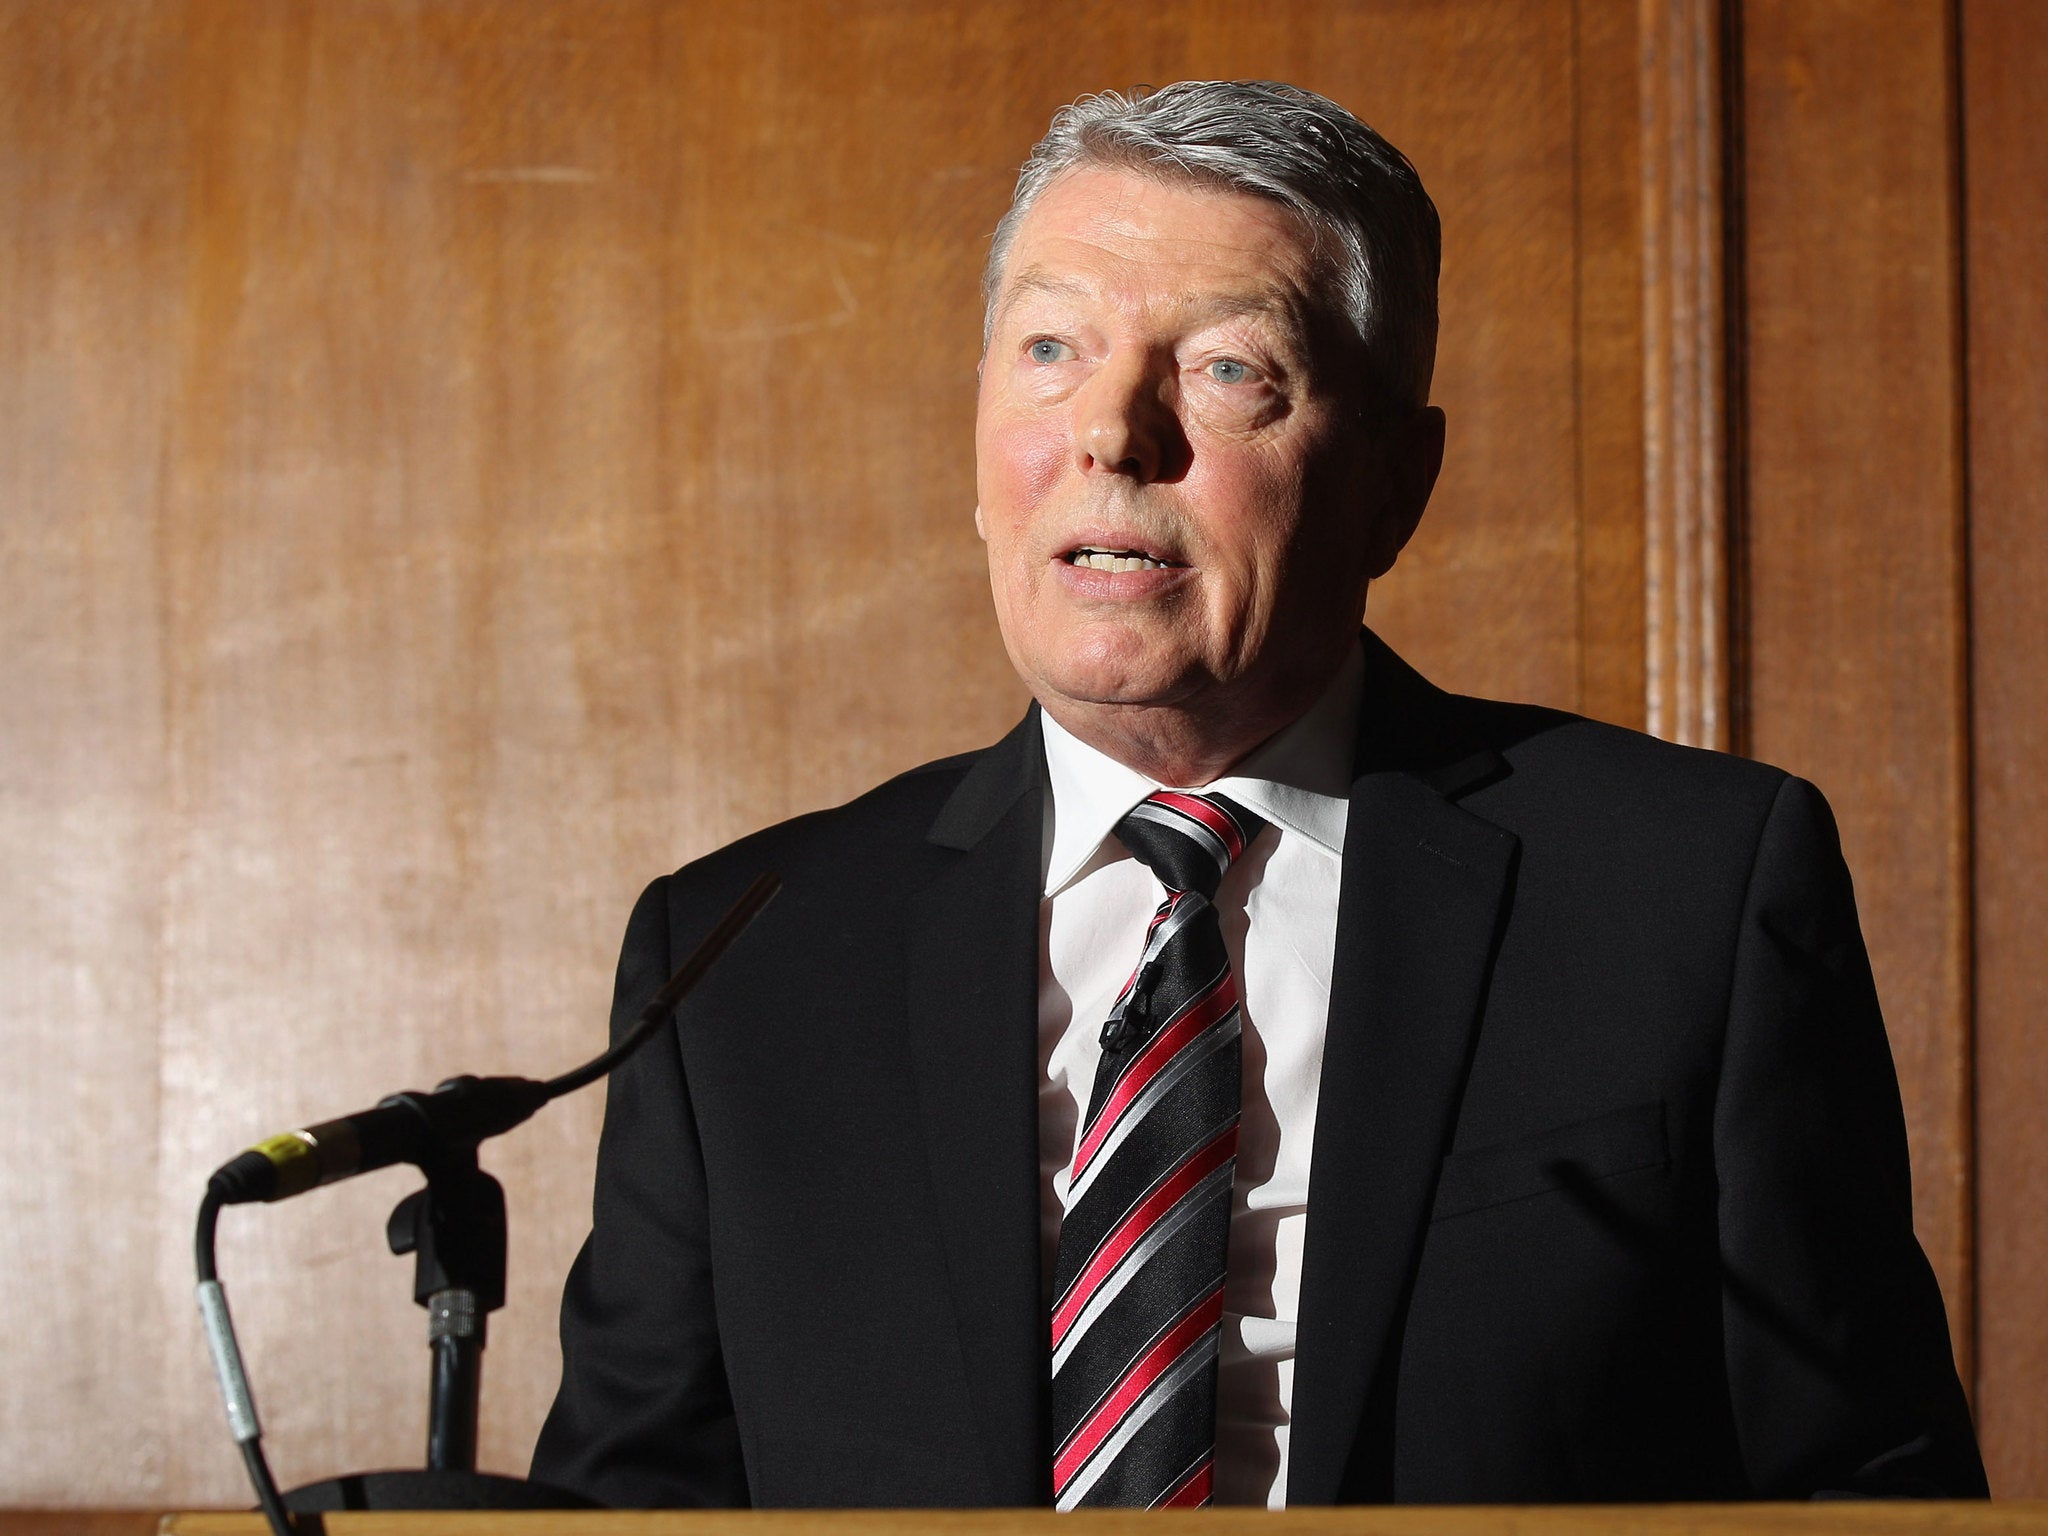 Alan Johnson has confirmed he will not run to be Labour leader